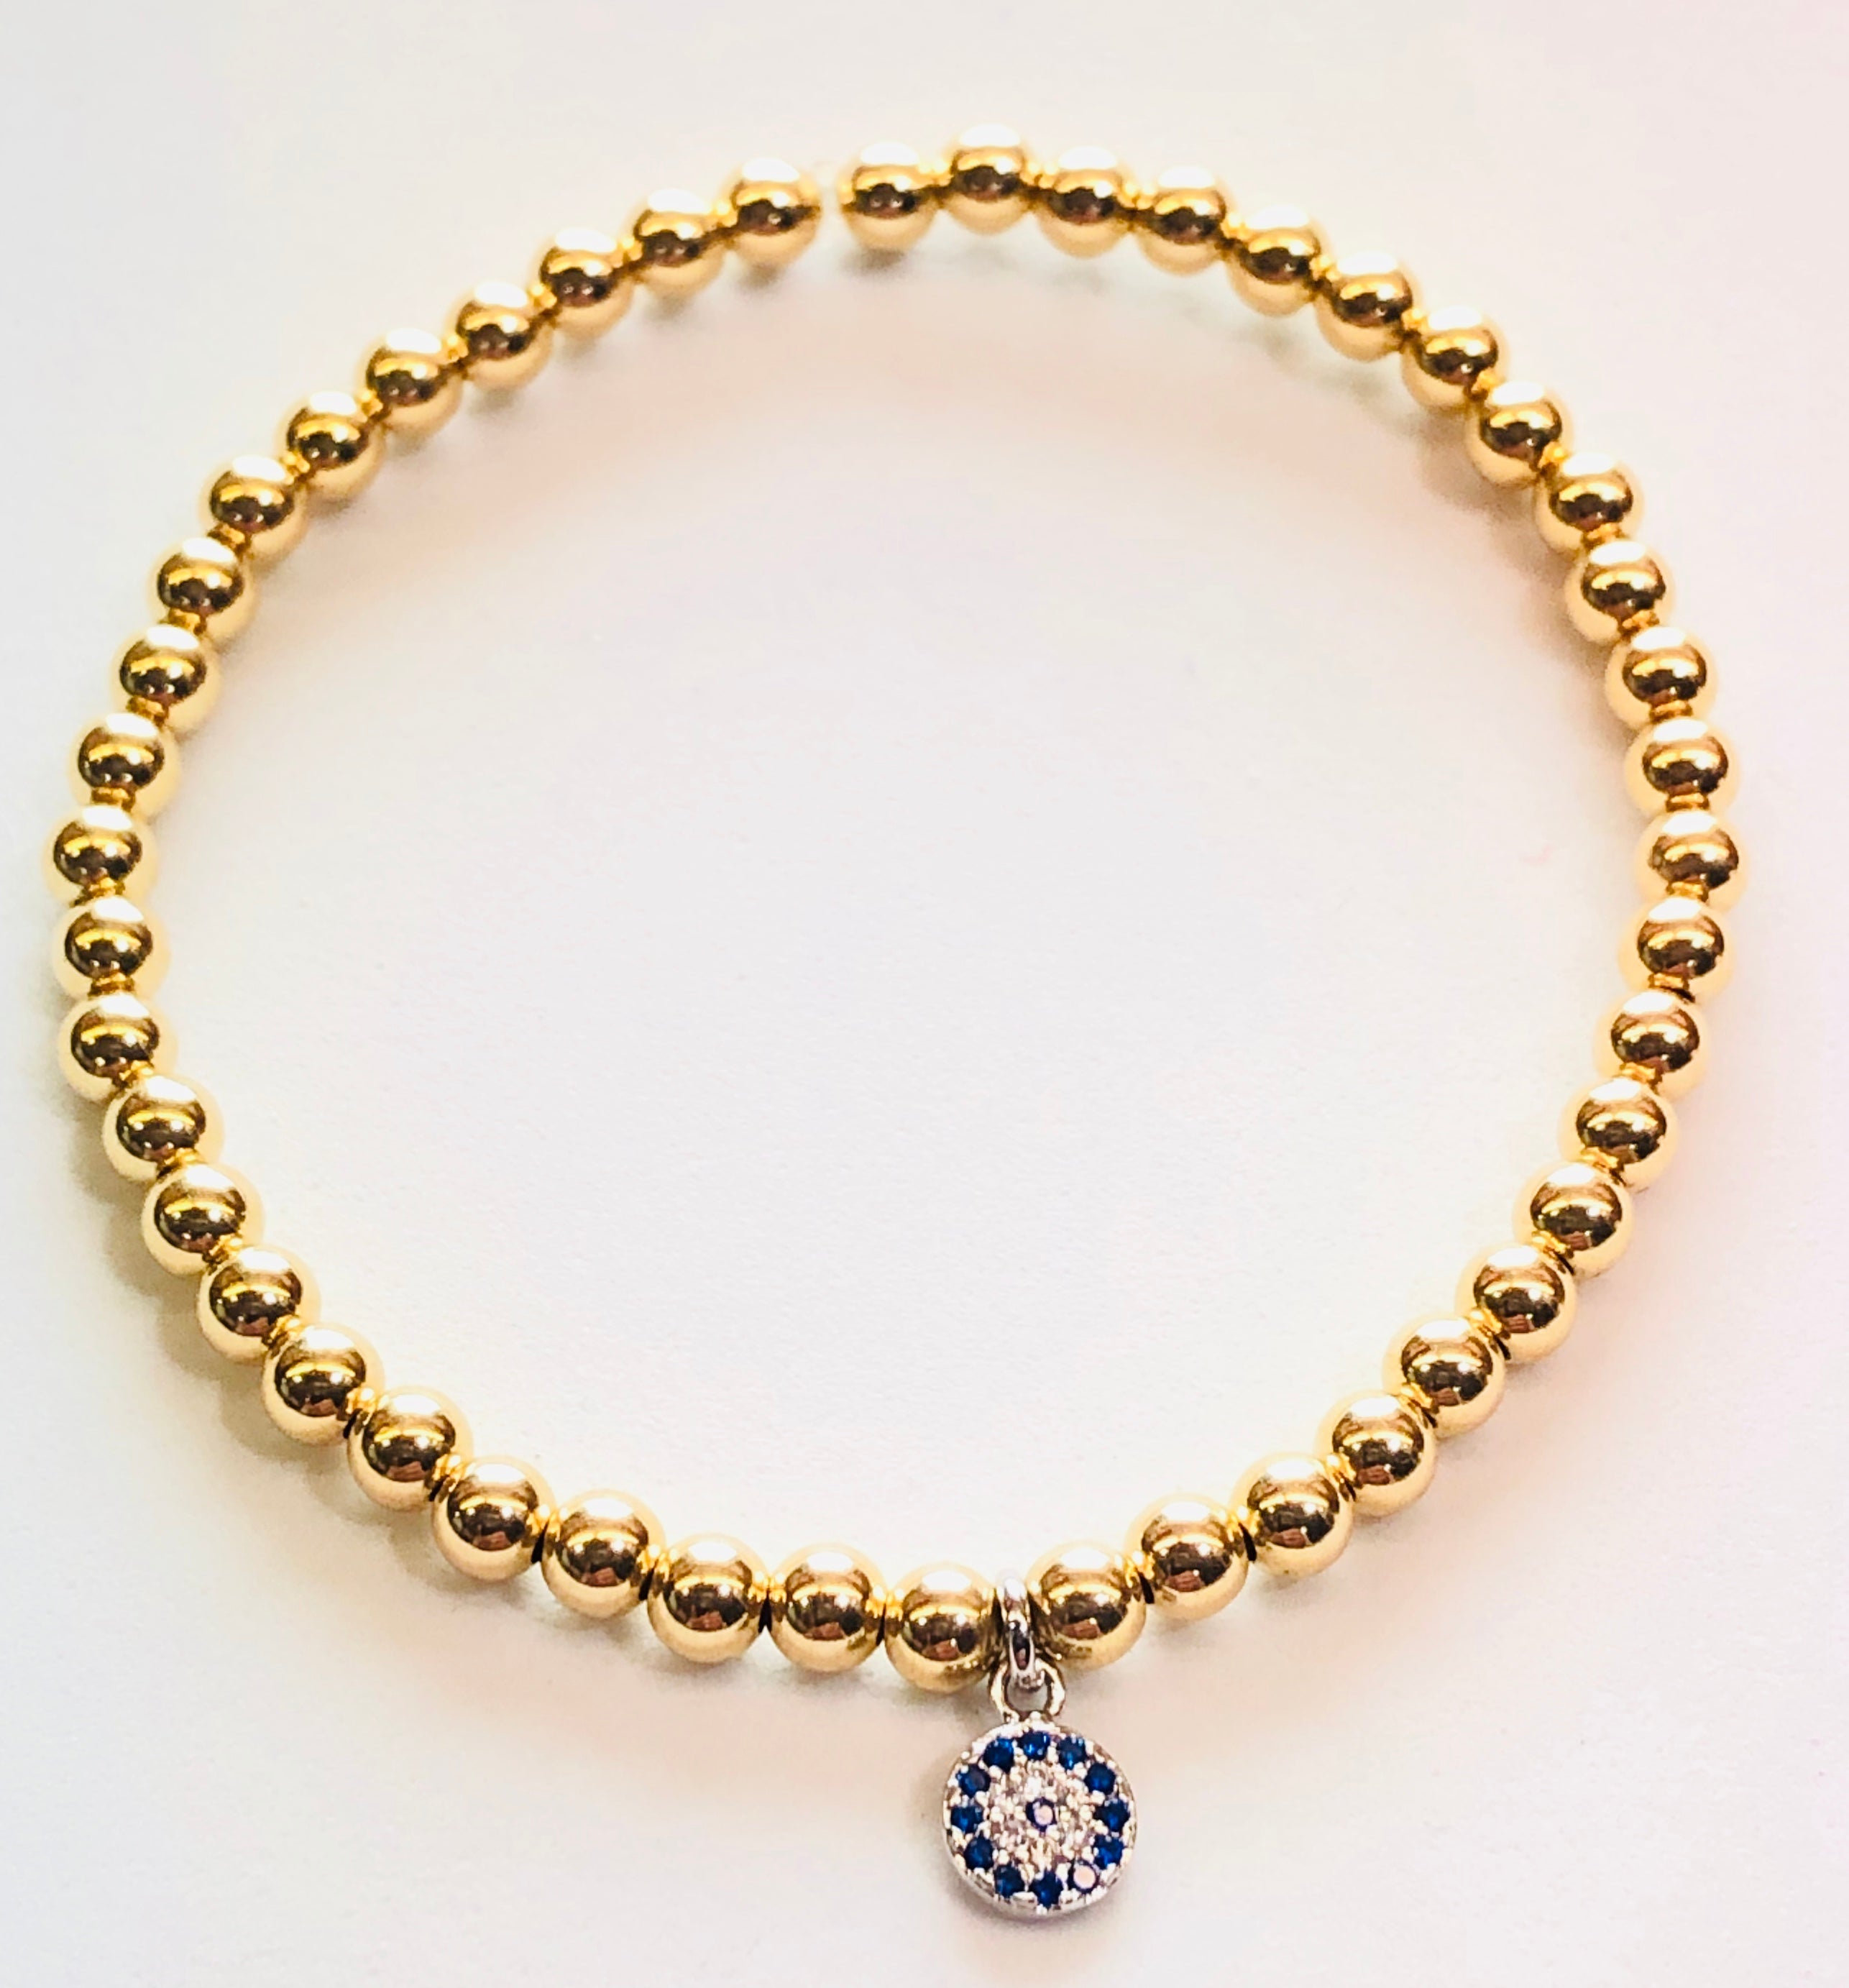 4mm 14kt Gold Filled Bead Bracelet with Small Round Sapphire Jeweled Hanging Charm